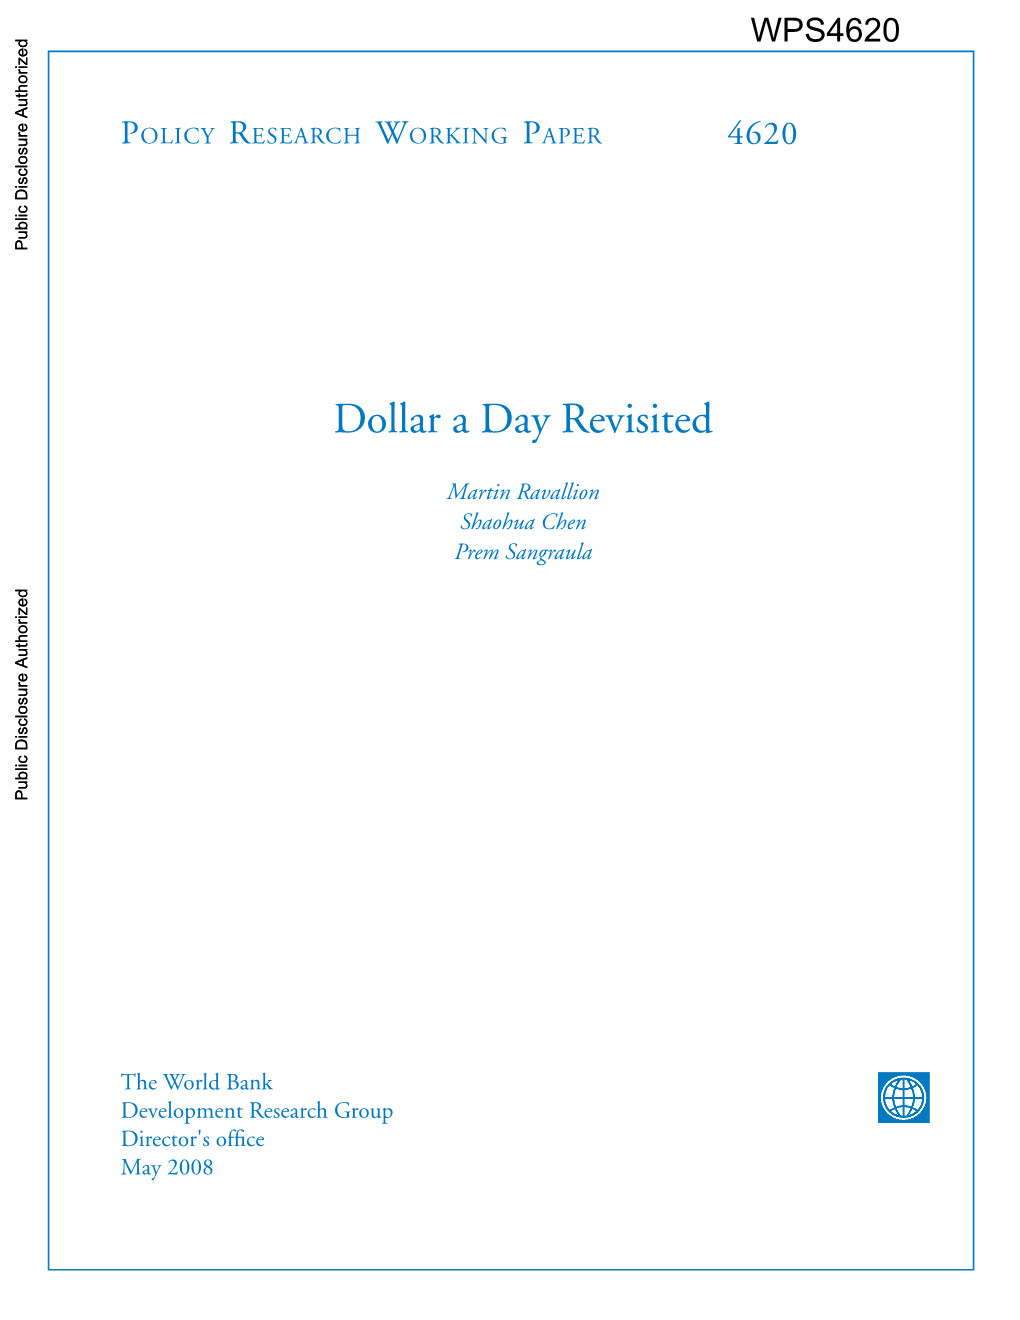 Dollar a Day Revisited